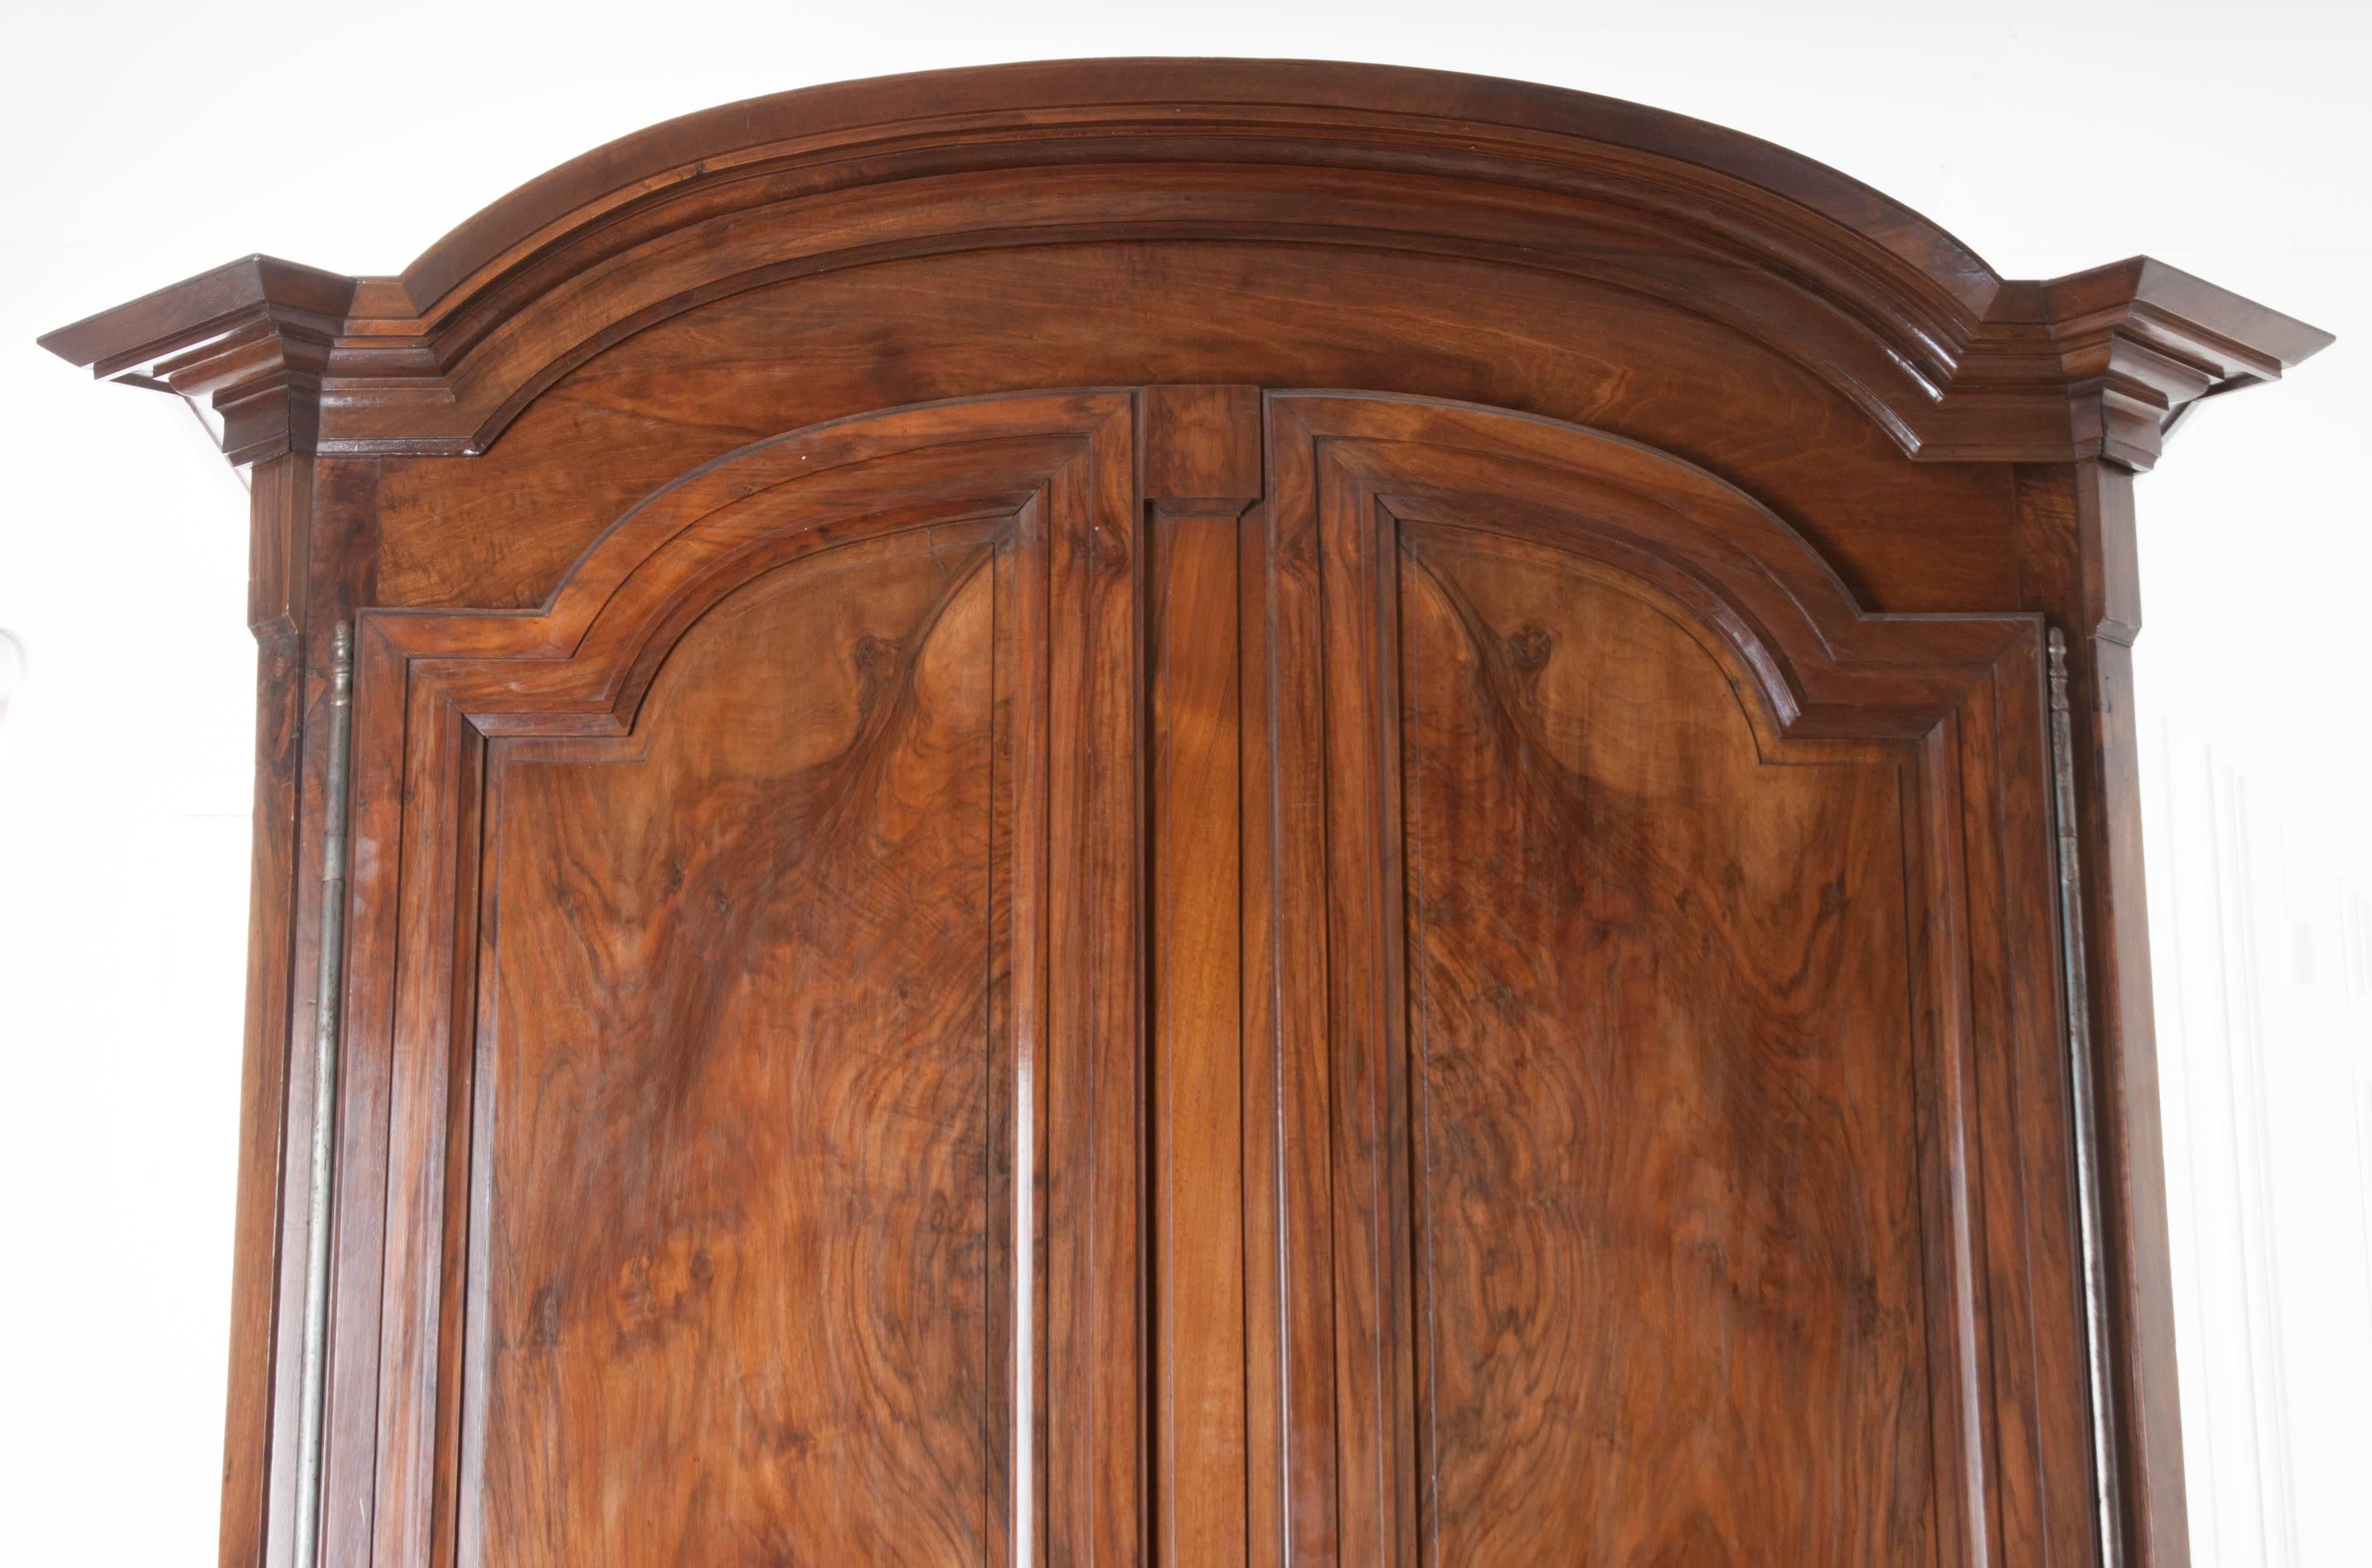 This paramount solid walnut armoire was built in France at the early part of the 19th century. A Classic Chapeau de Gendarme cornice, which essentially translates to 